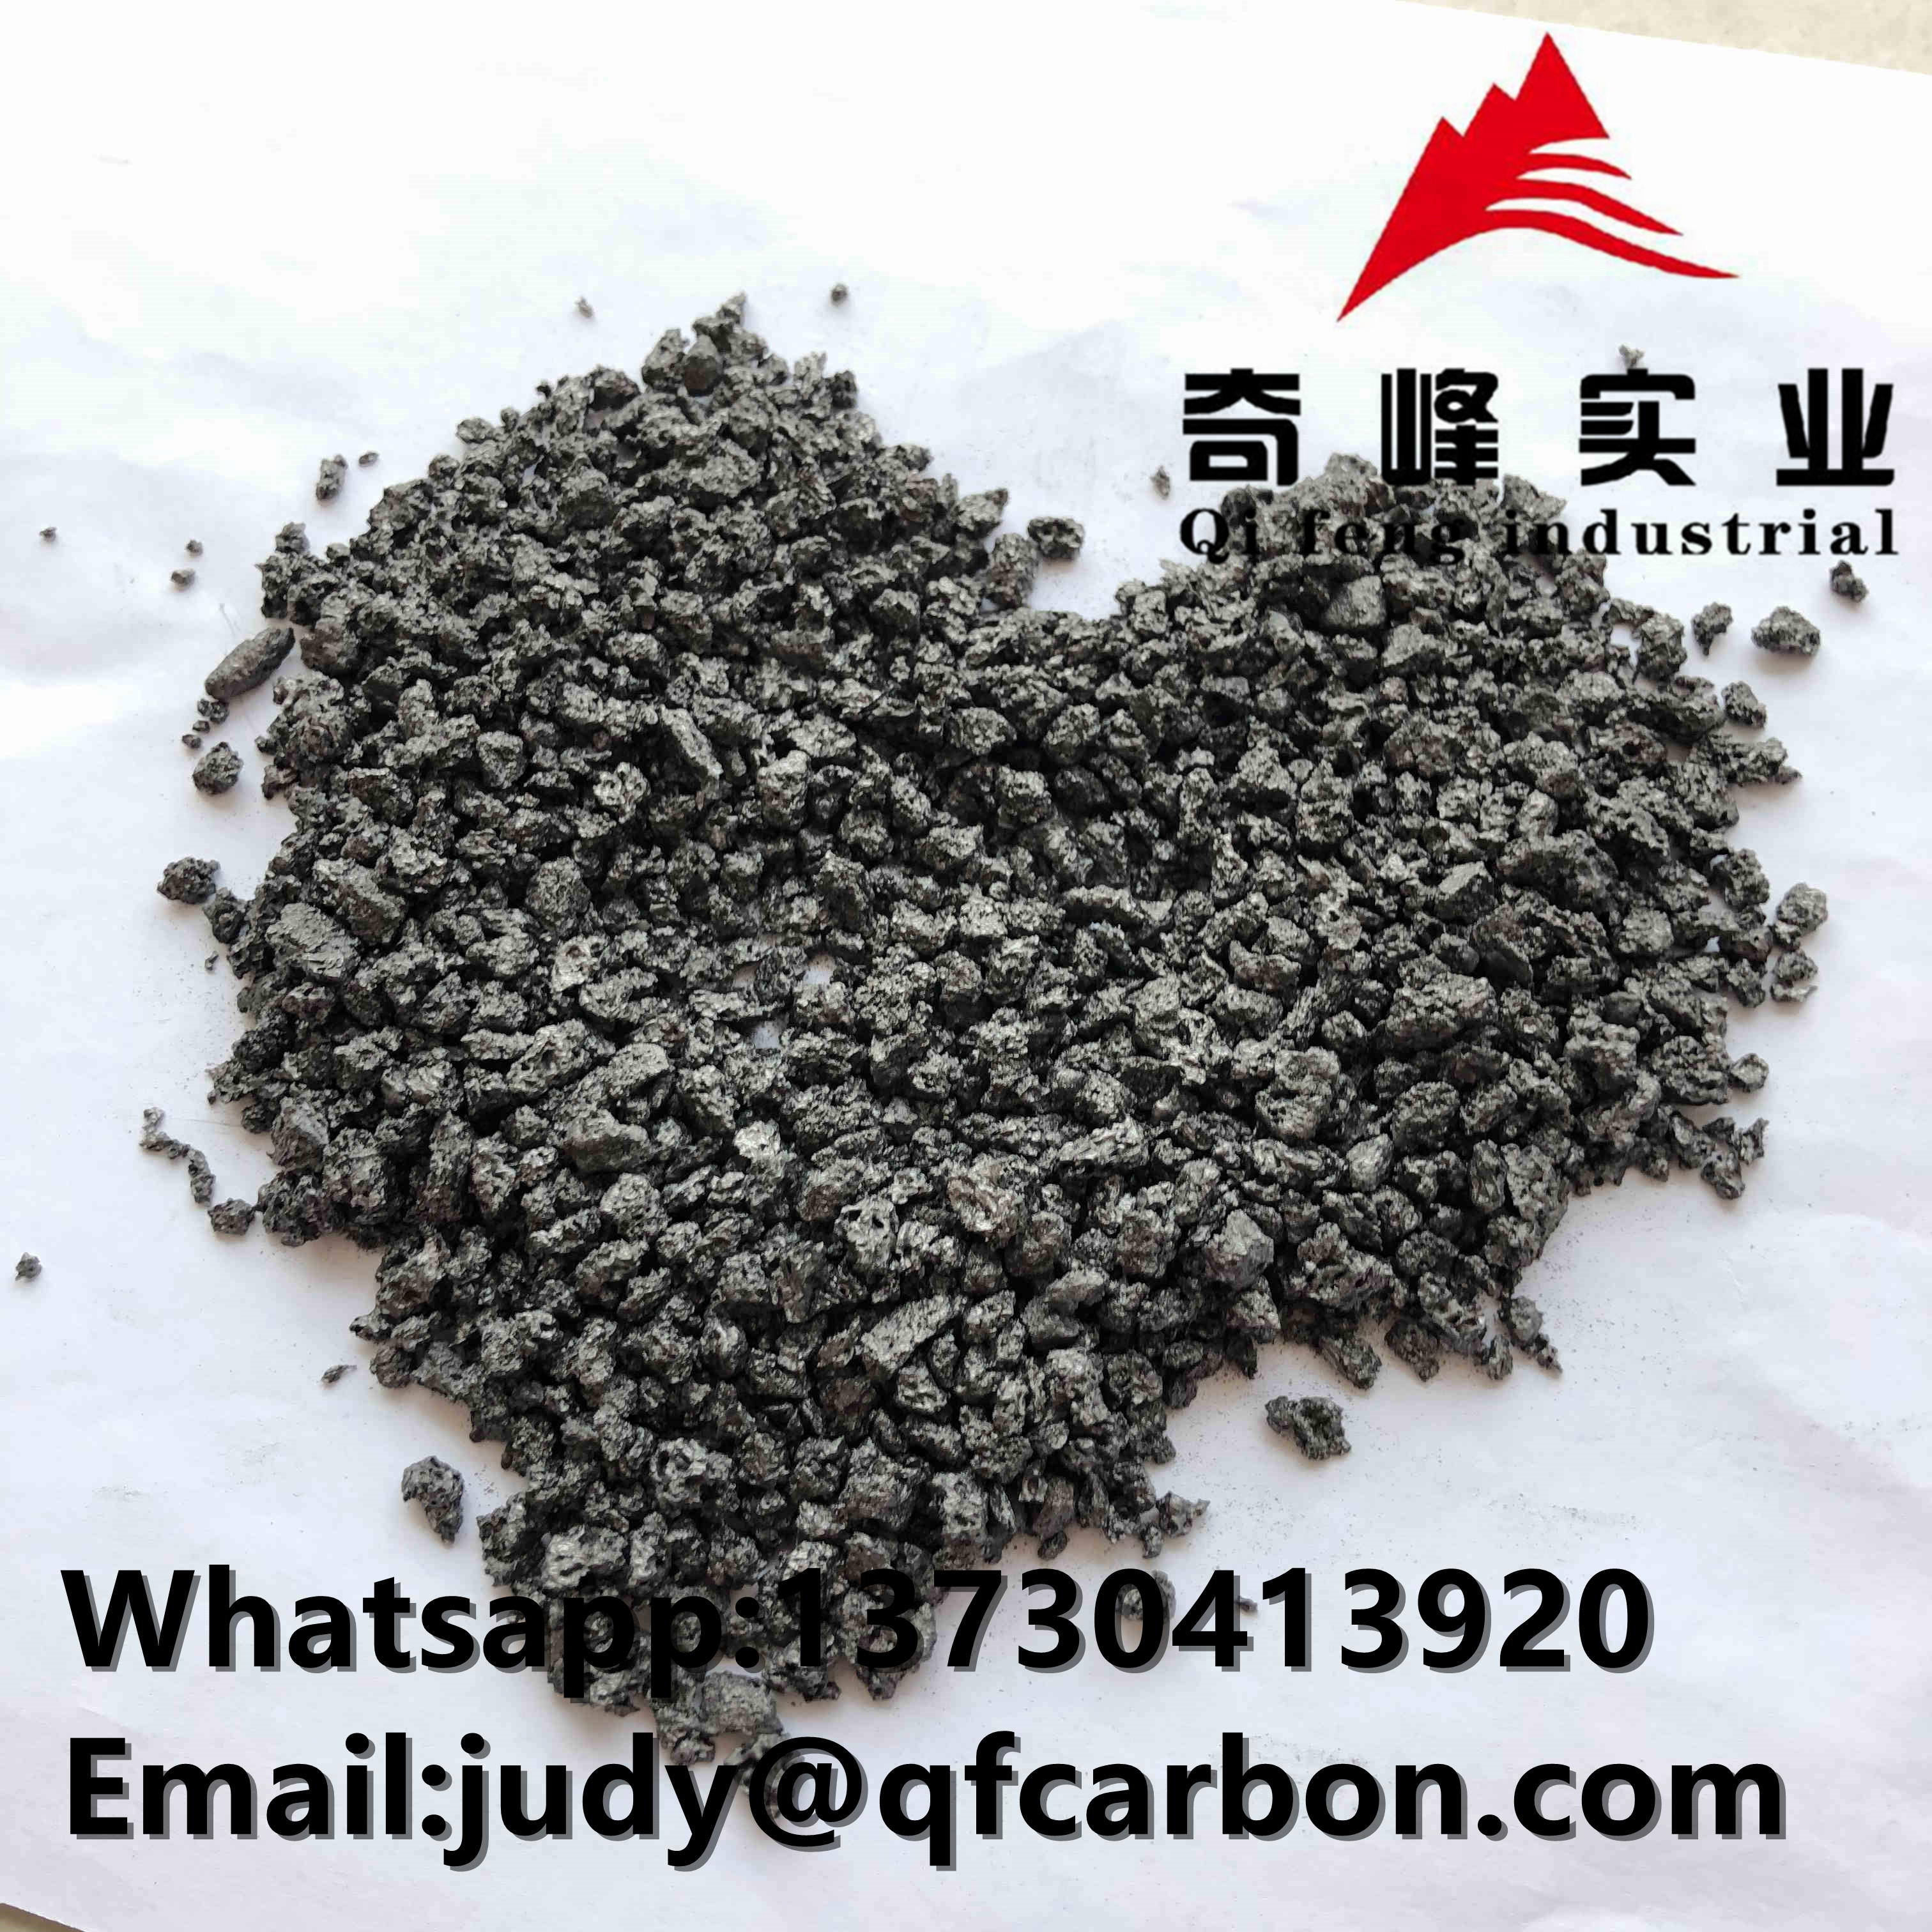 What are the uses and advantages of graphite carburizer?